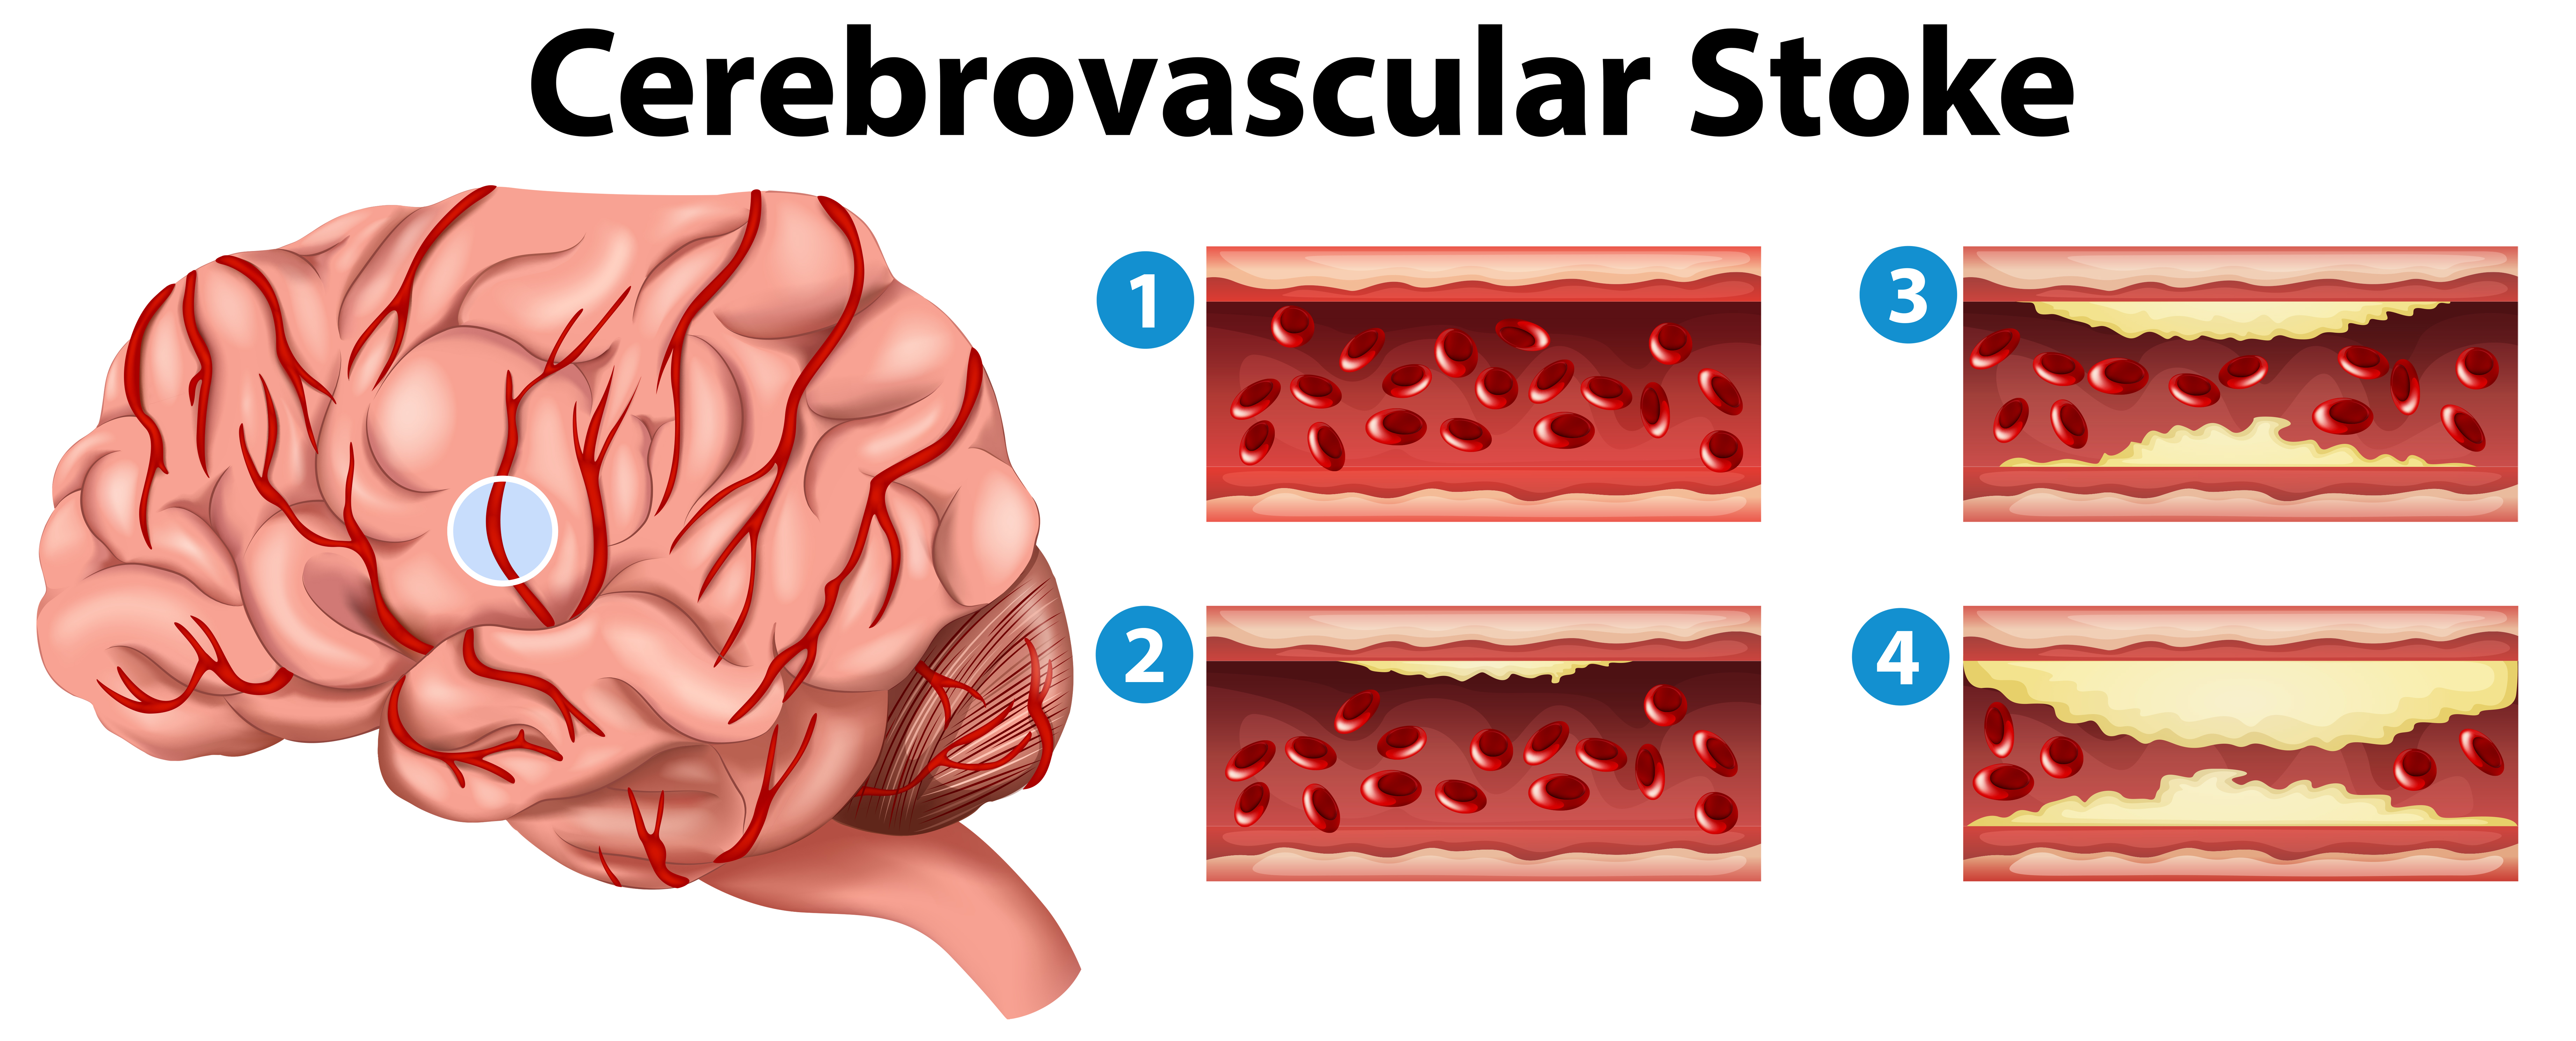 Diagram Showing Stages Of Cerebrovascular Stroke